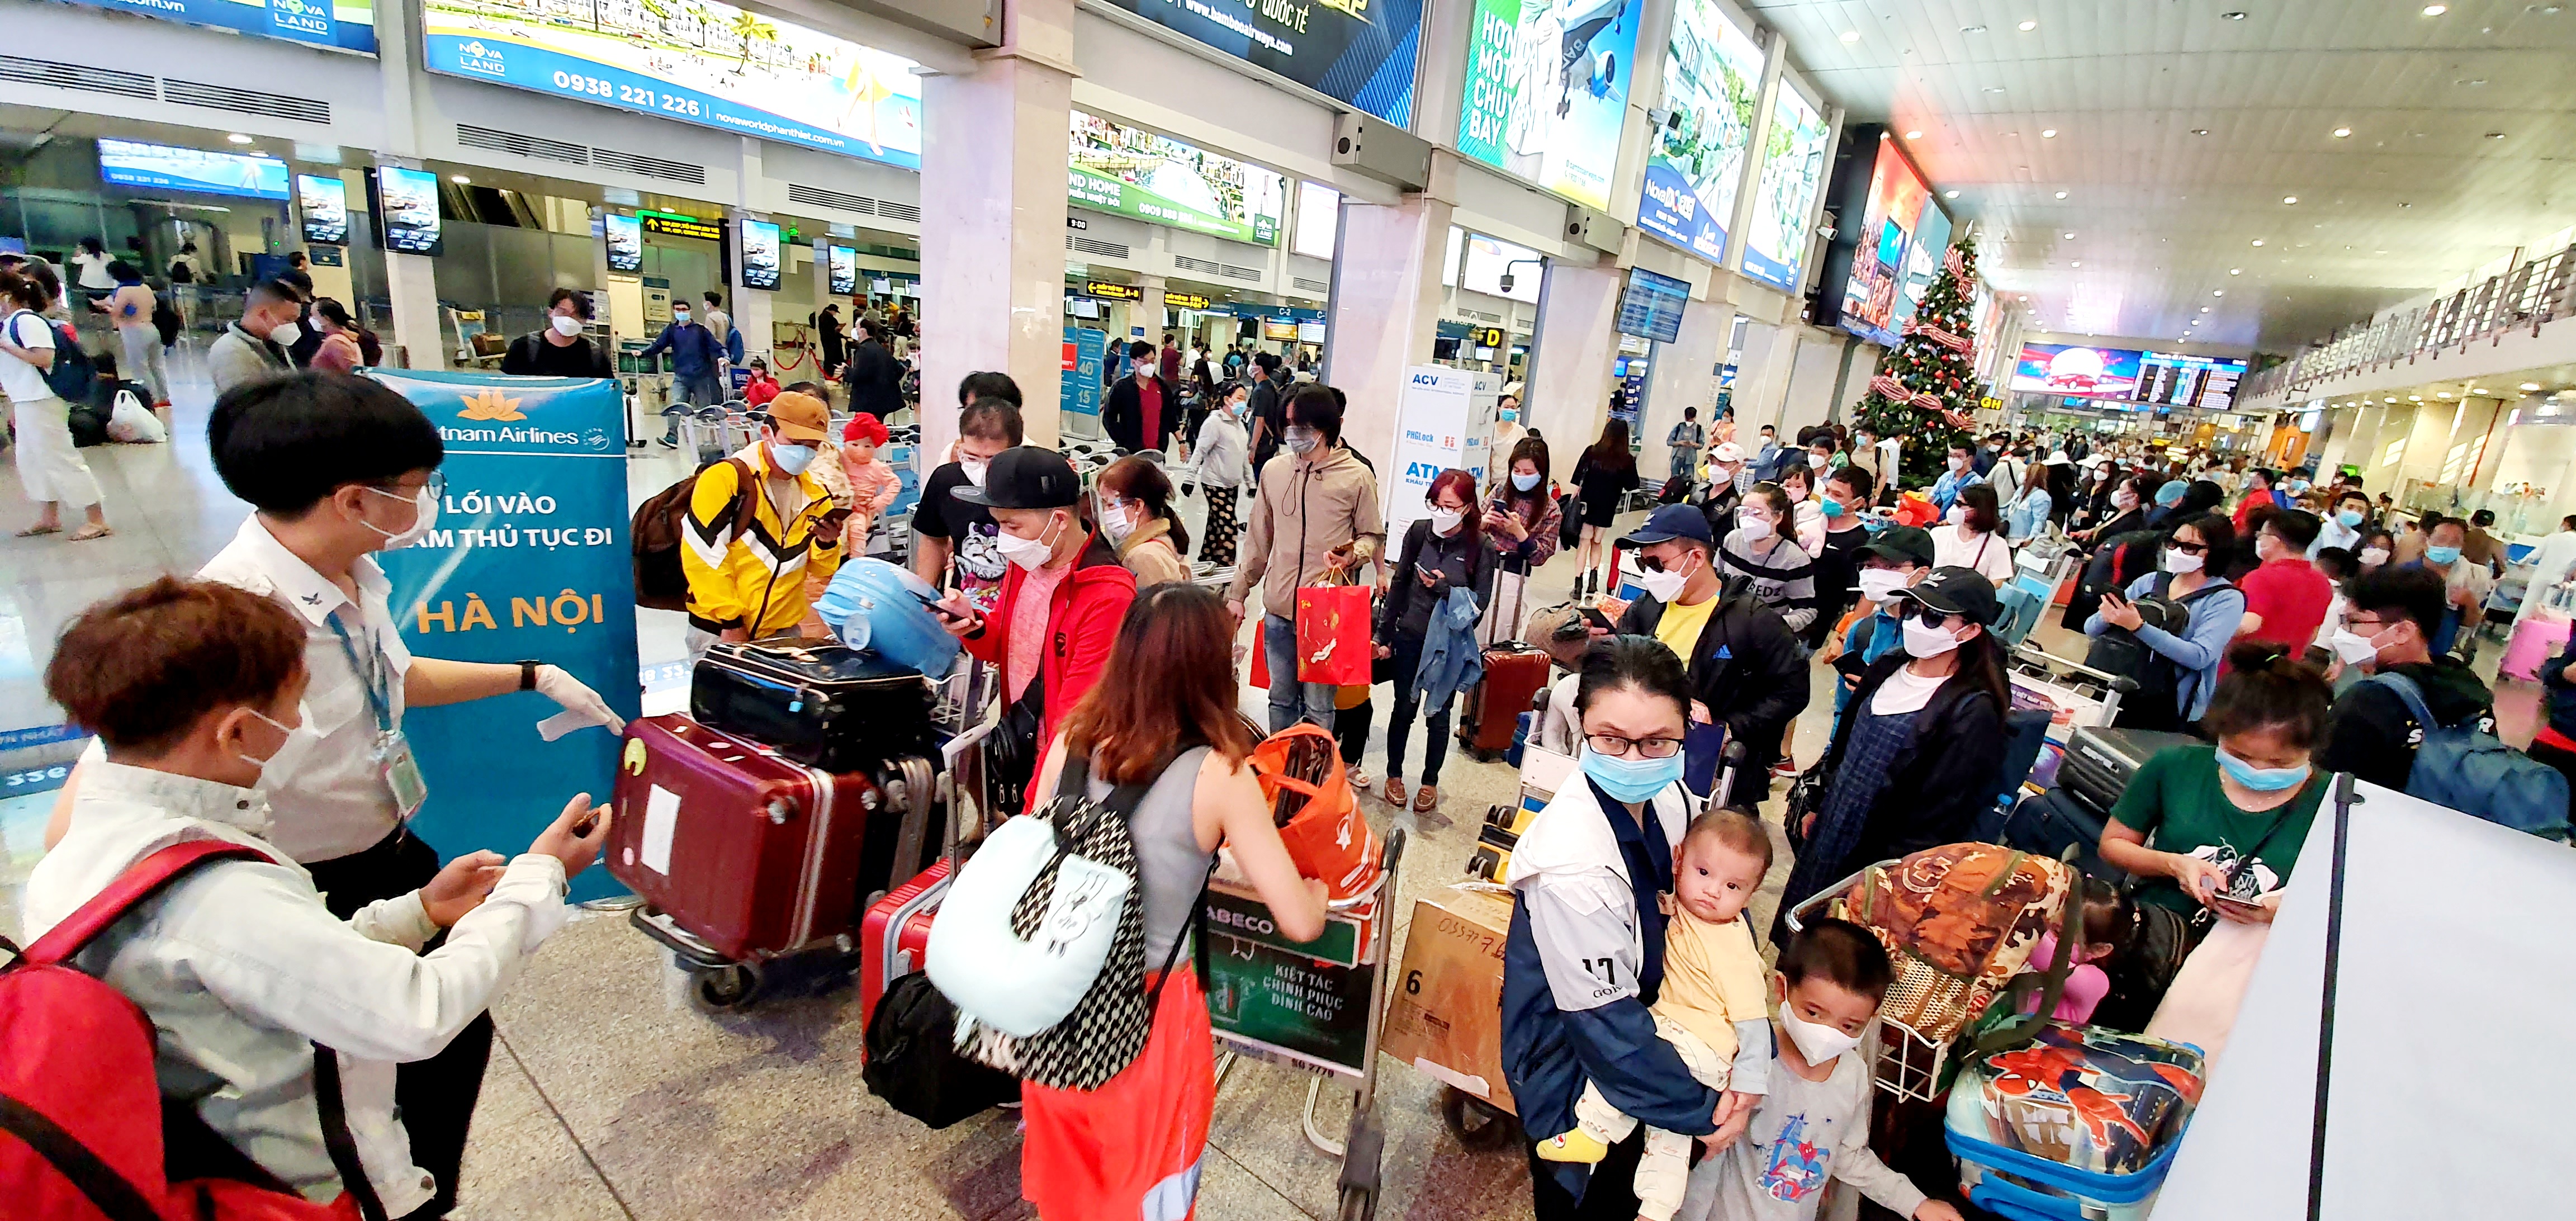 A high influx of people are seen arriving at Tan Son Nhat International Airport in Ho Chi Minh City, January 23, 2022. Photo: Cong Trung / Tuoi Tre